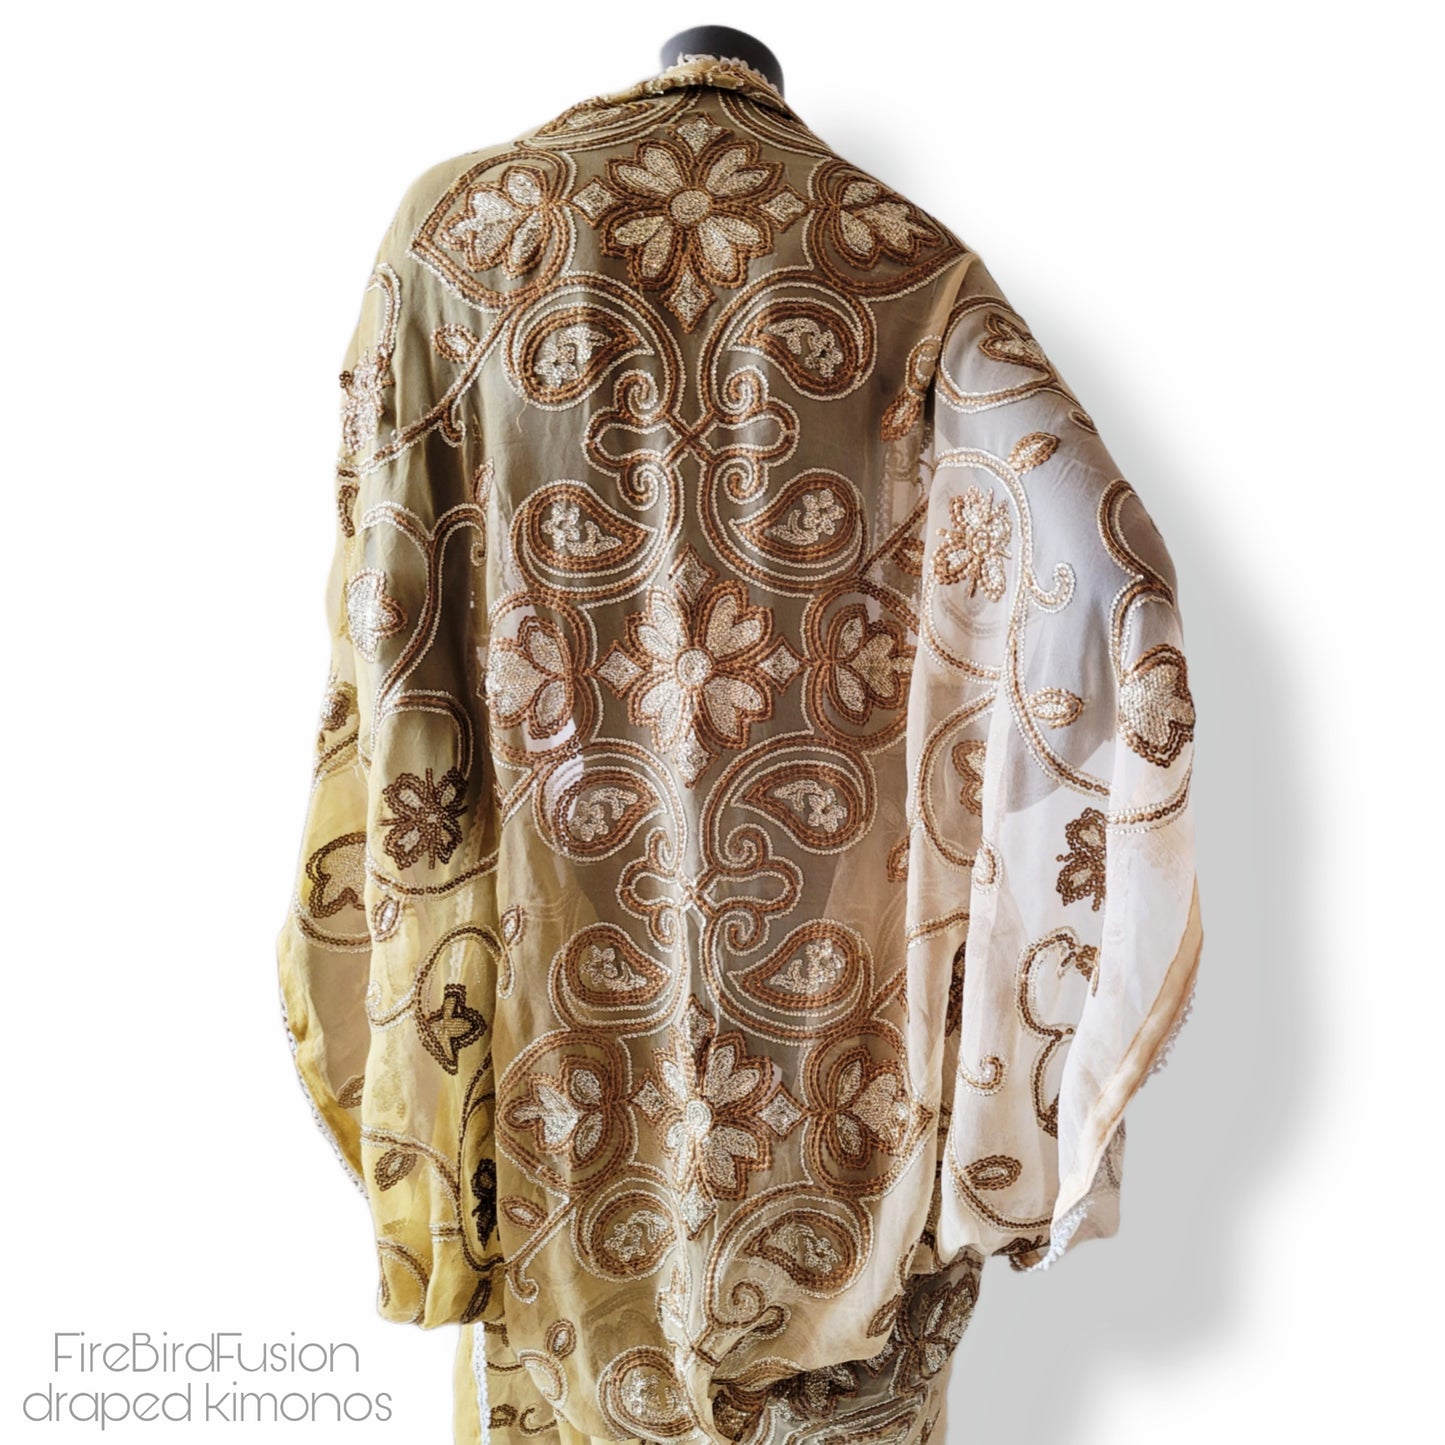 Draped kimono in ivory and beige with bronze and antique gold art deco inspired embroidery (M-L)